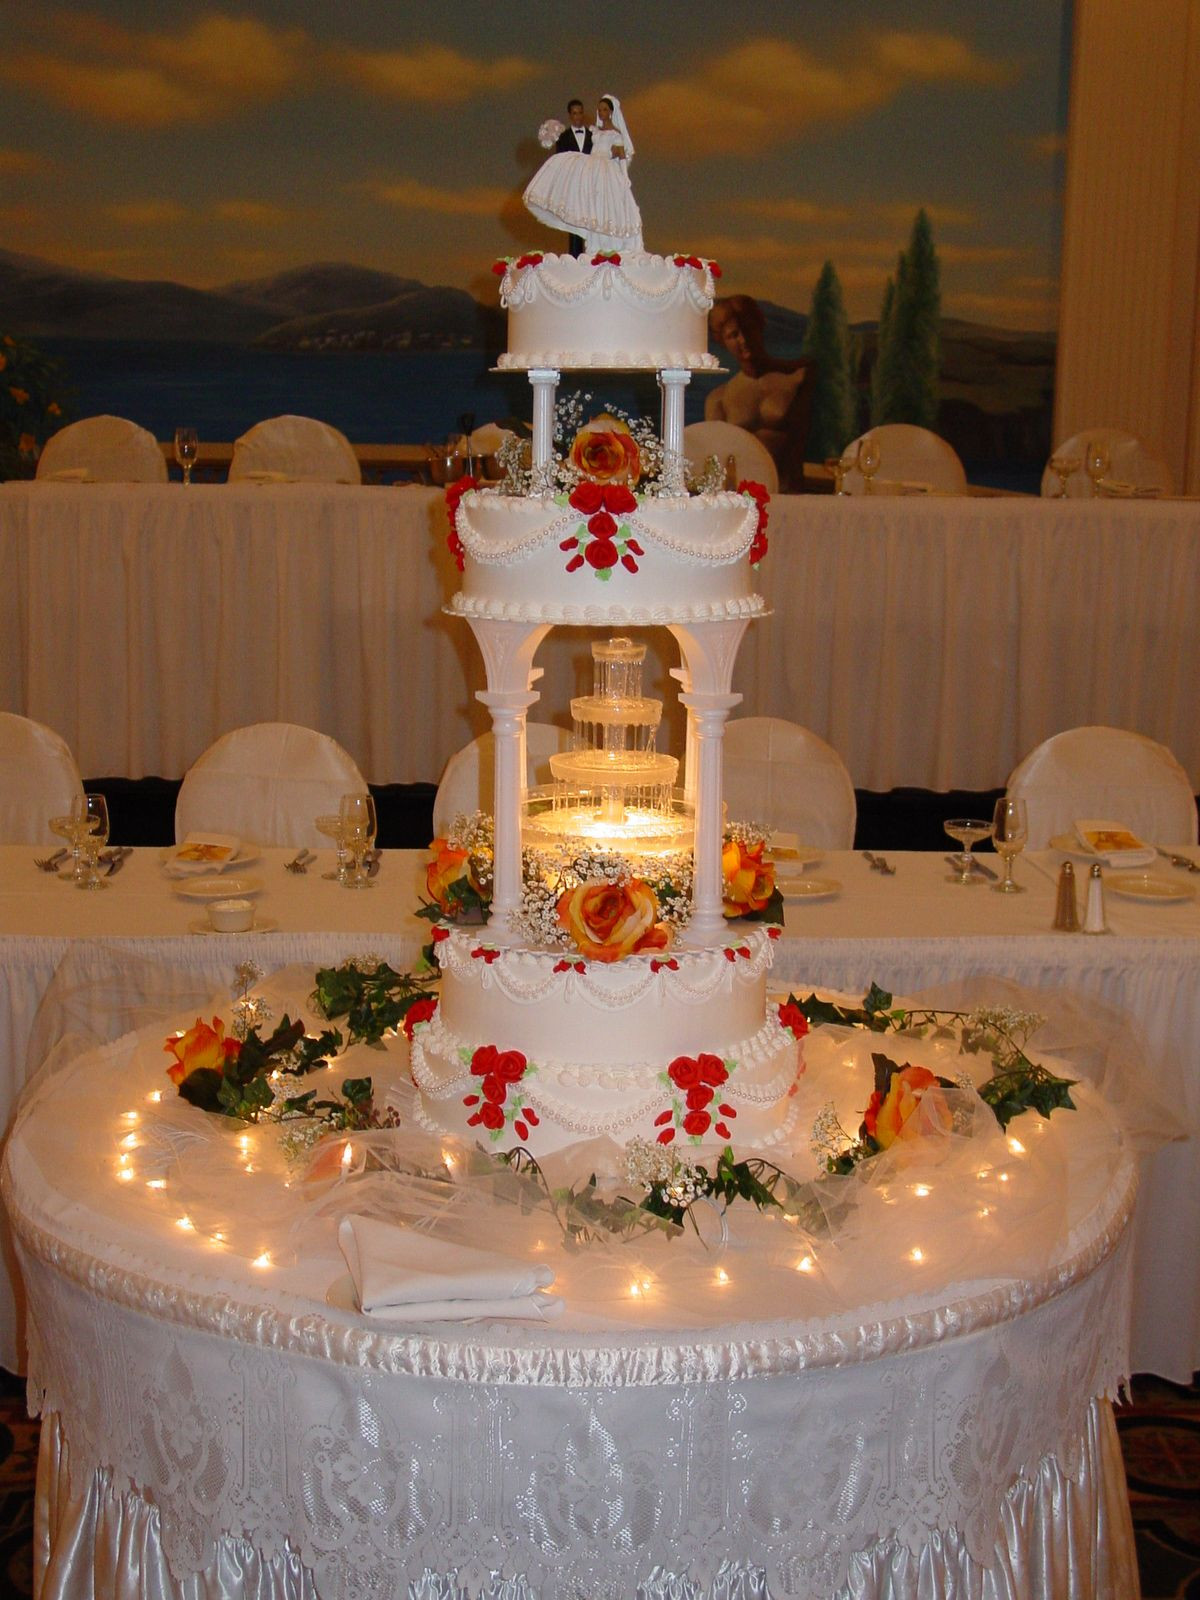 Waterfalls Wedding Cakes
 Beautiful Wedding Cakes with Fountains